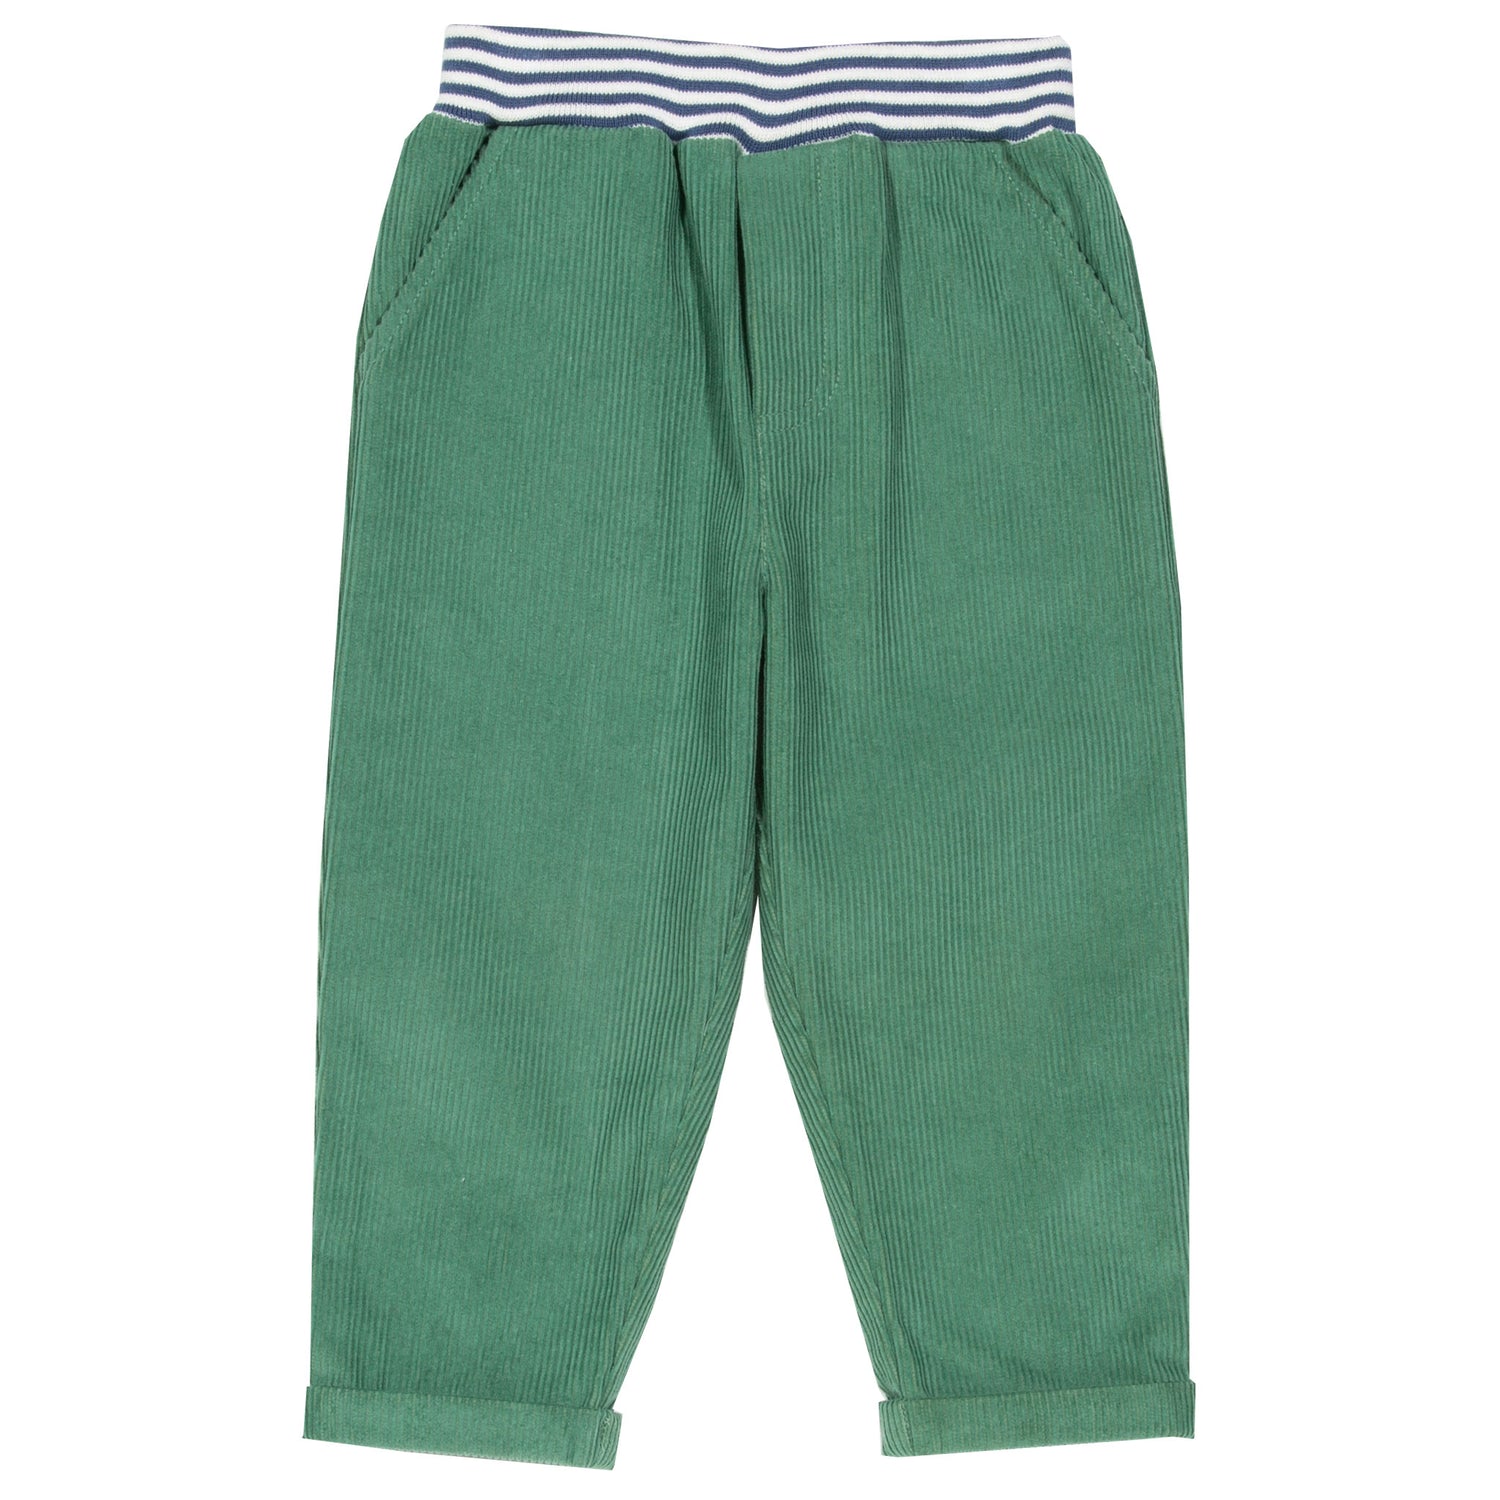 Green cord trousers